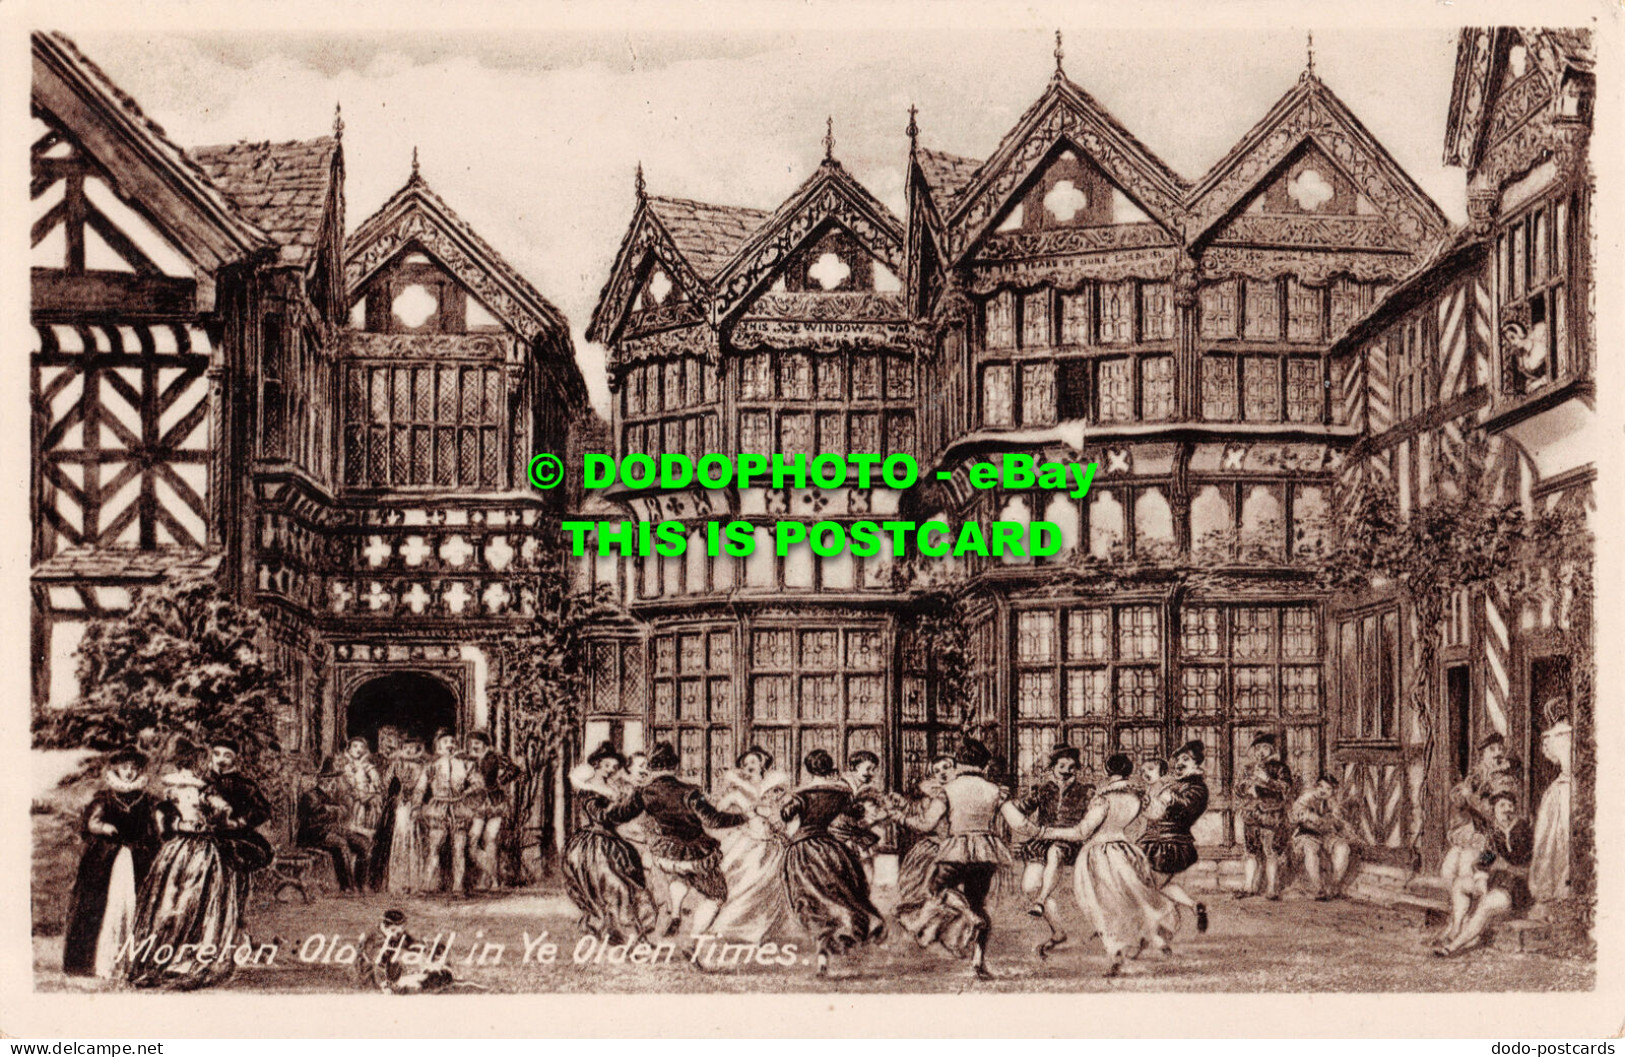 R507653 Moreton Old Hall In Ye Olden Times. W. S. B - World